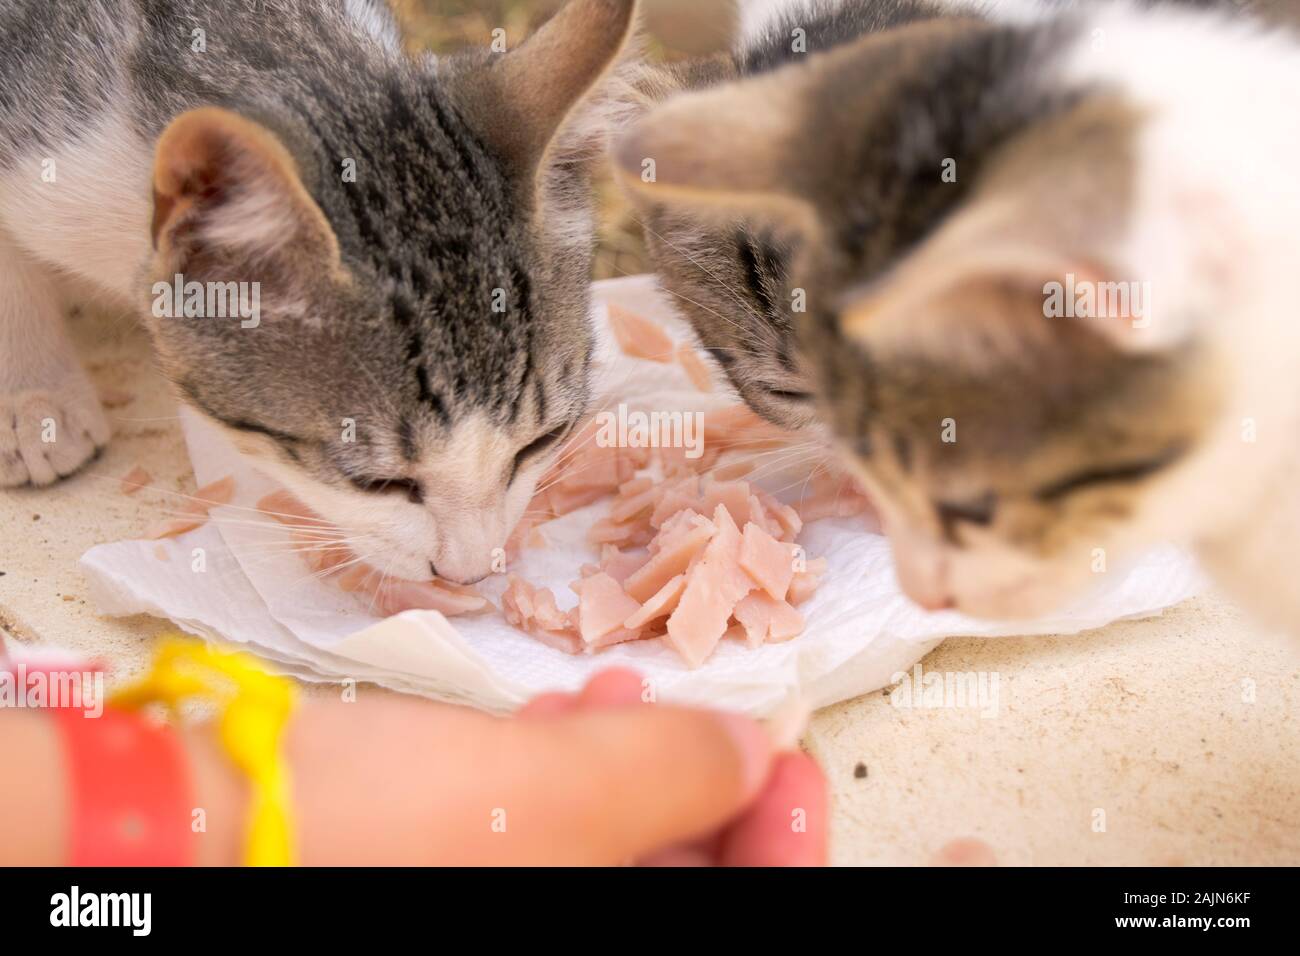 kitties rescued. Feeding abandoned stray cats left behind. Street animals in need for medical care and food. Helping abandoned animals. Stock Photo